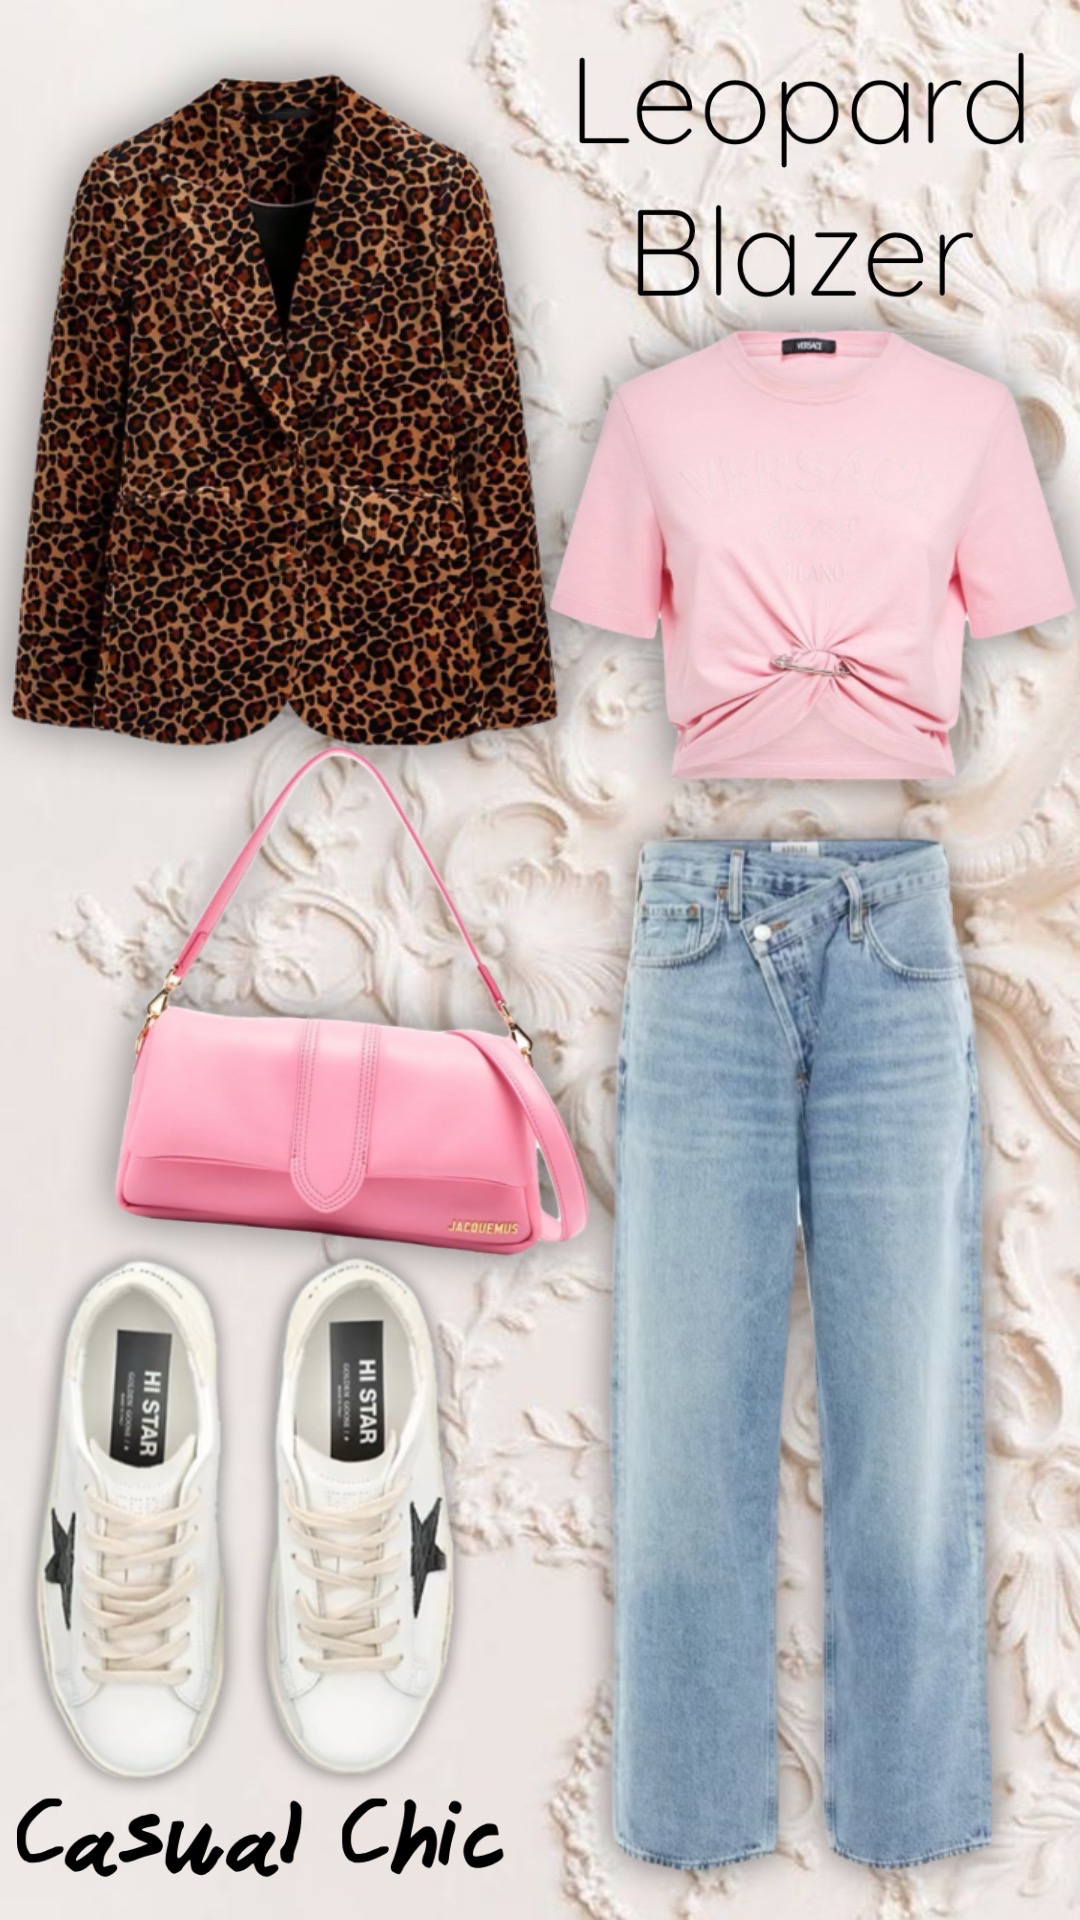 Style Guide: Integrating Leopard Print into Your Wardrobe